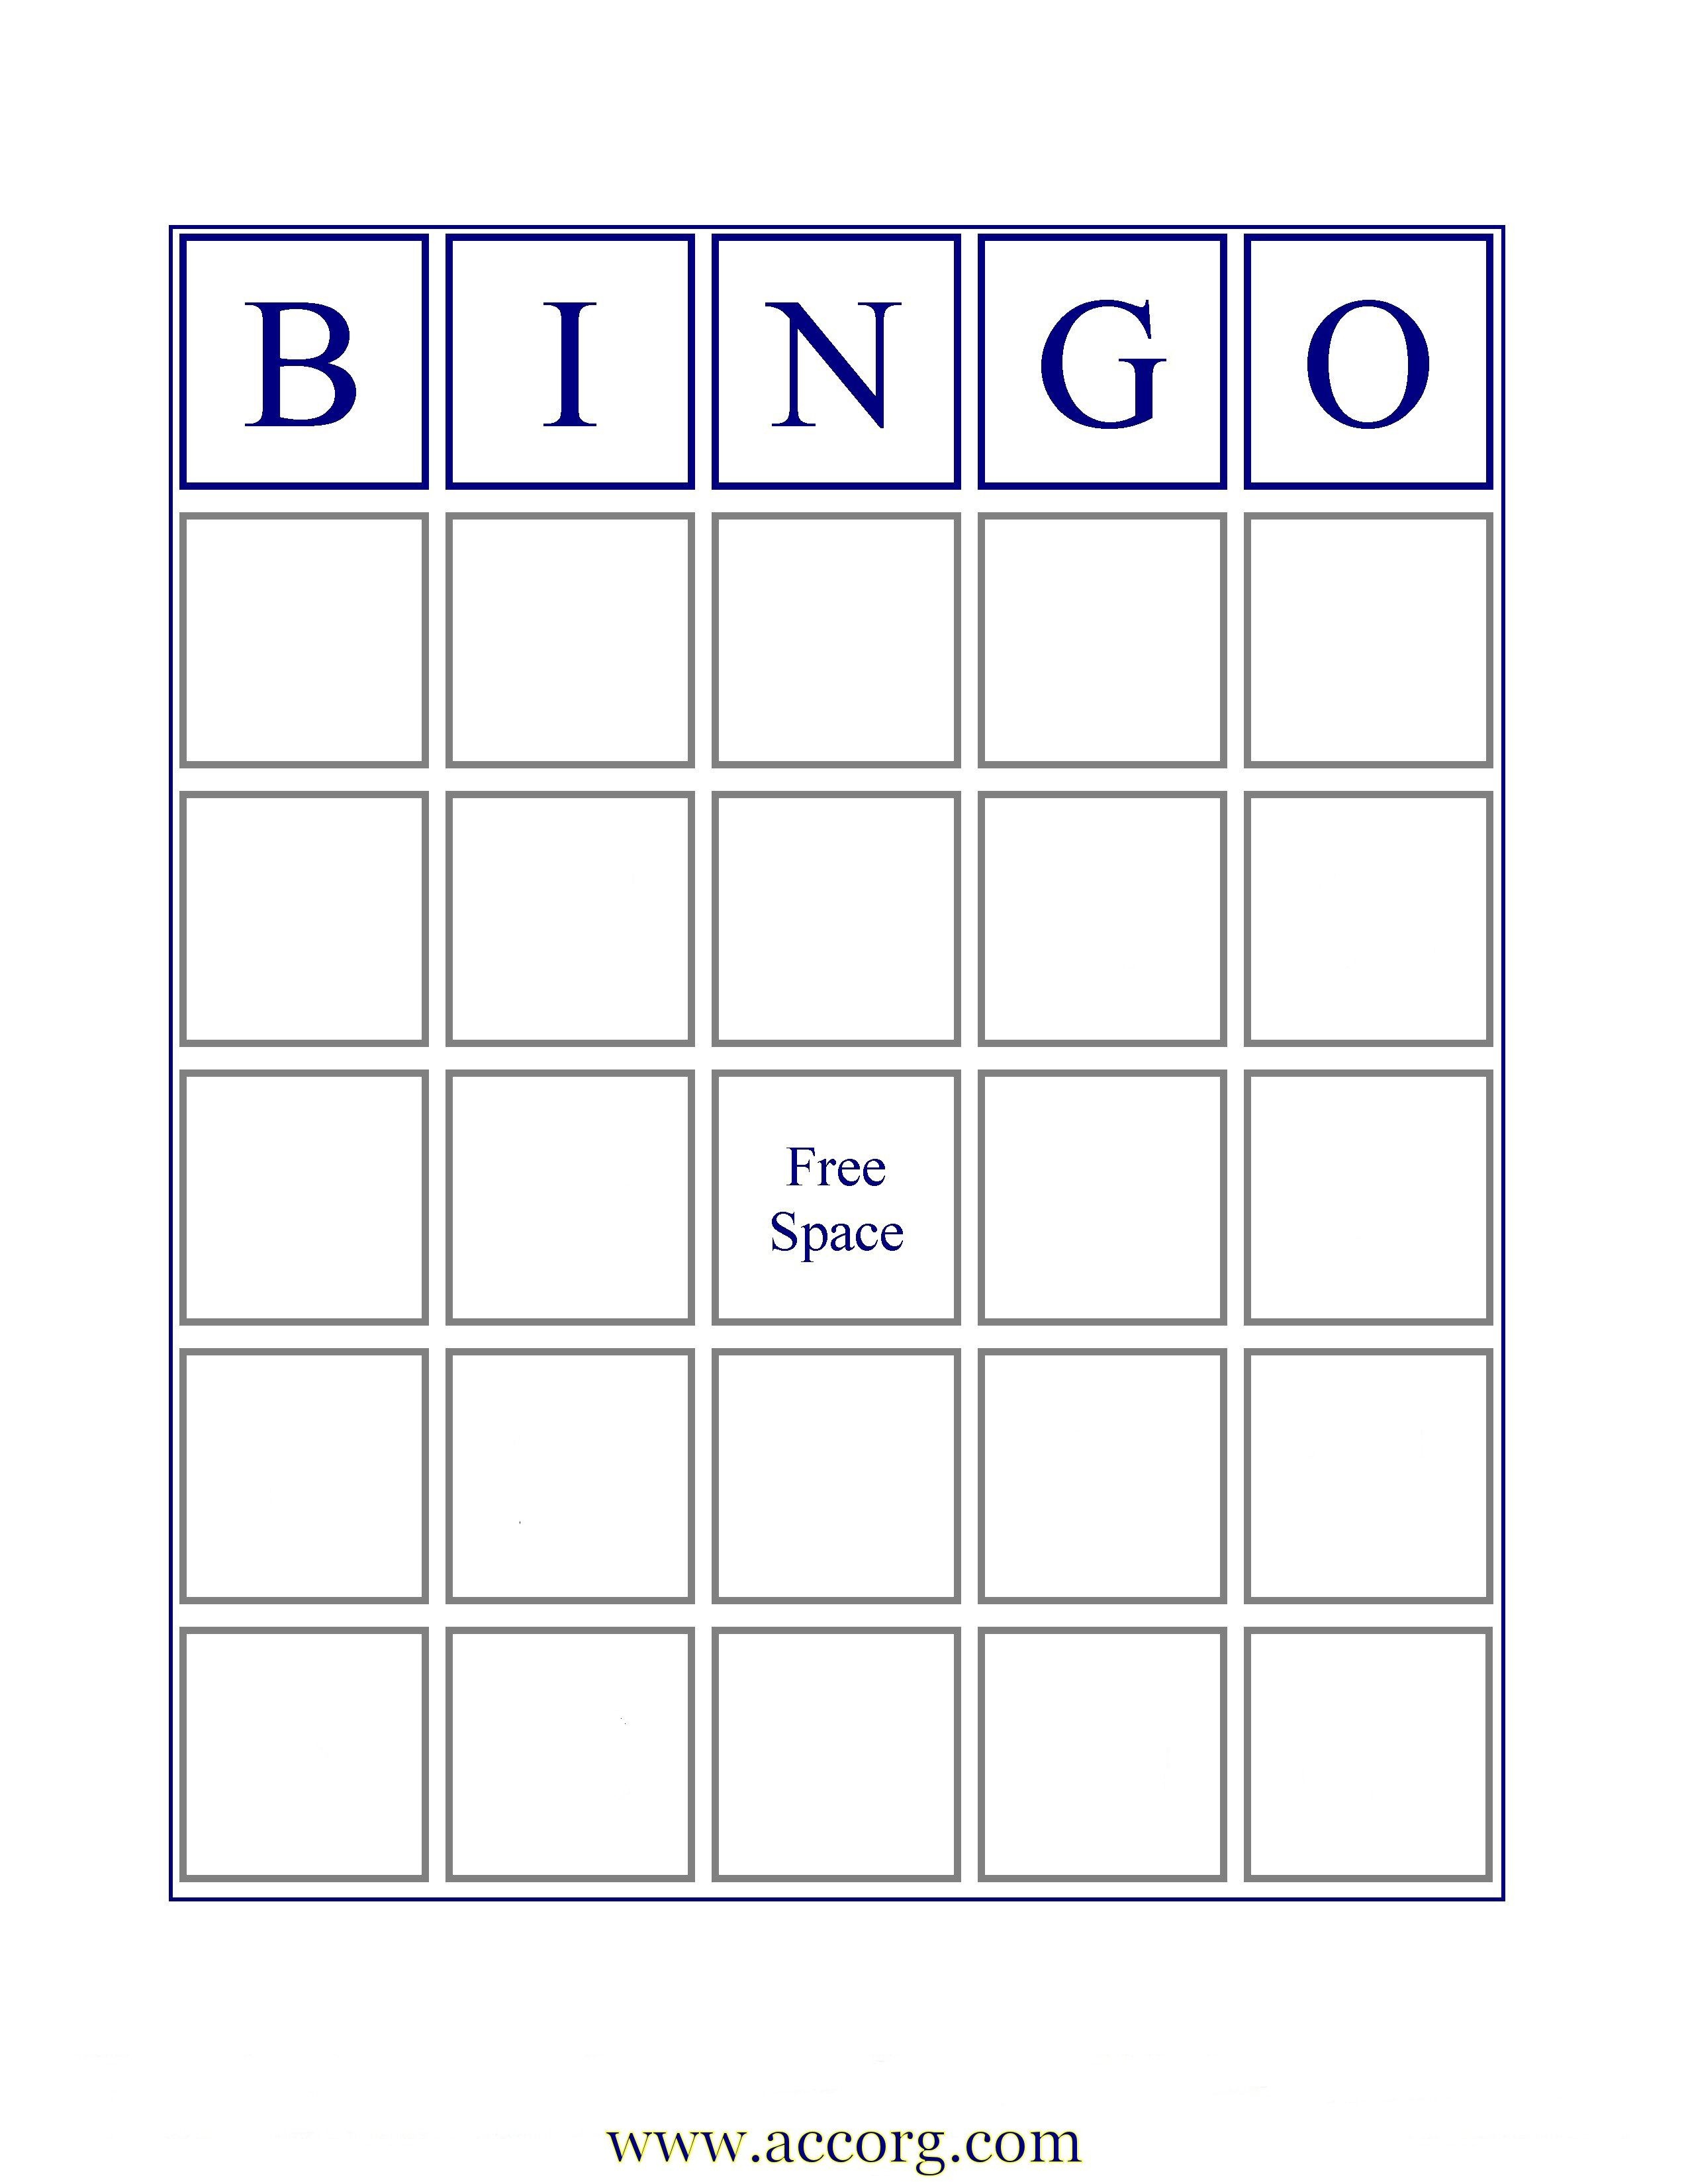 Blank Bingo Cards | If You Want An Image Of A Standard Bingo Card - Free Printable Blank Bingo Cards For Teachers